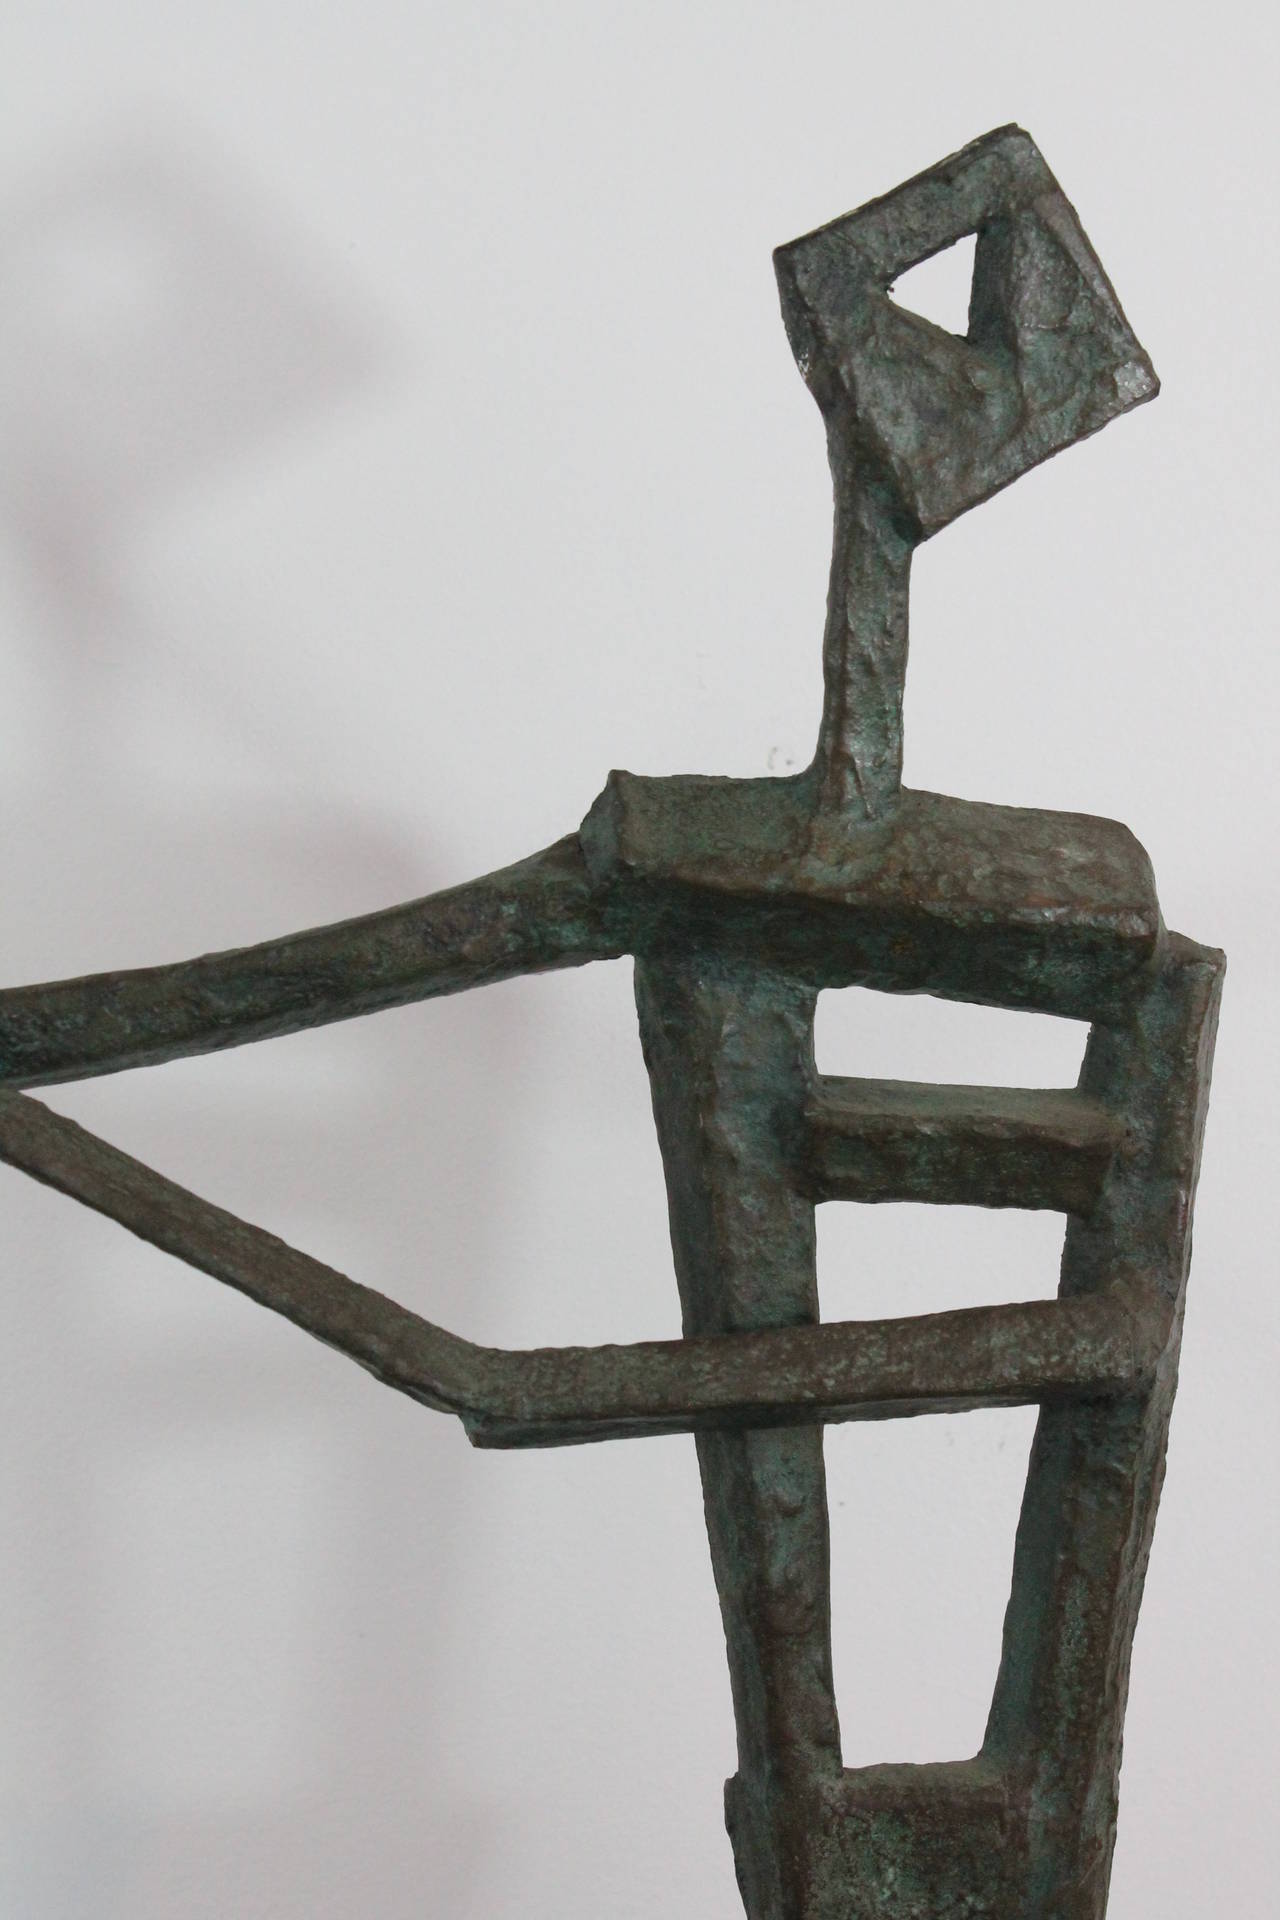 Wonderful attenuated semi-abstracted geometric figure in bronze by Harriet Kittay.
Great scale and patina.
Powerful Modernist form and presence.
Stamped 1 / 8.
Comes with a letter from Edward I. Koch , the Mayor of New York to the Honorable